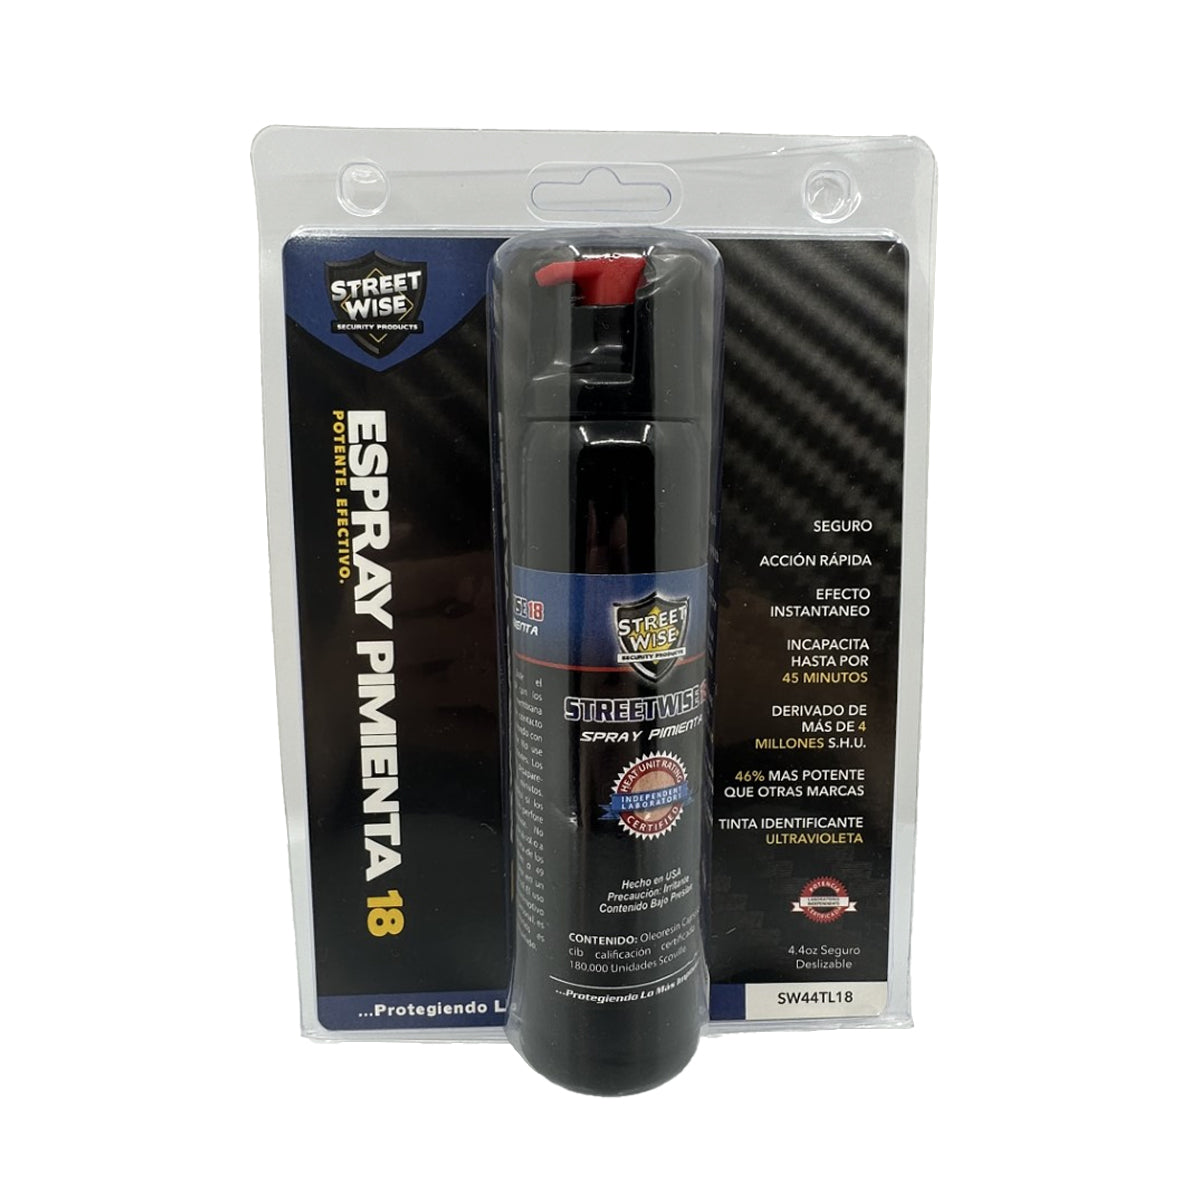 Streetwise 18 Pepper Spray 4.4 oz. Twist Lock (With Spanish Label And Back Card)